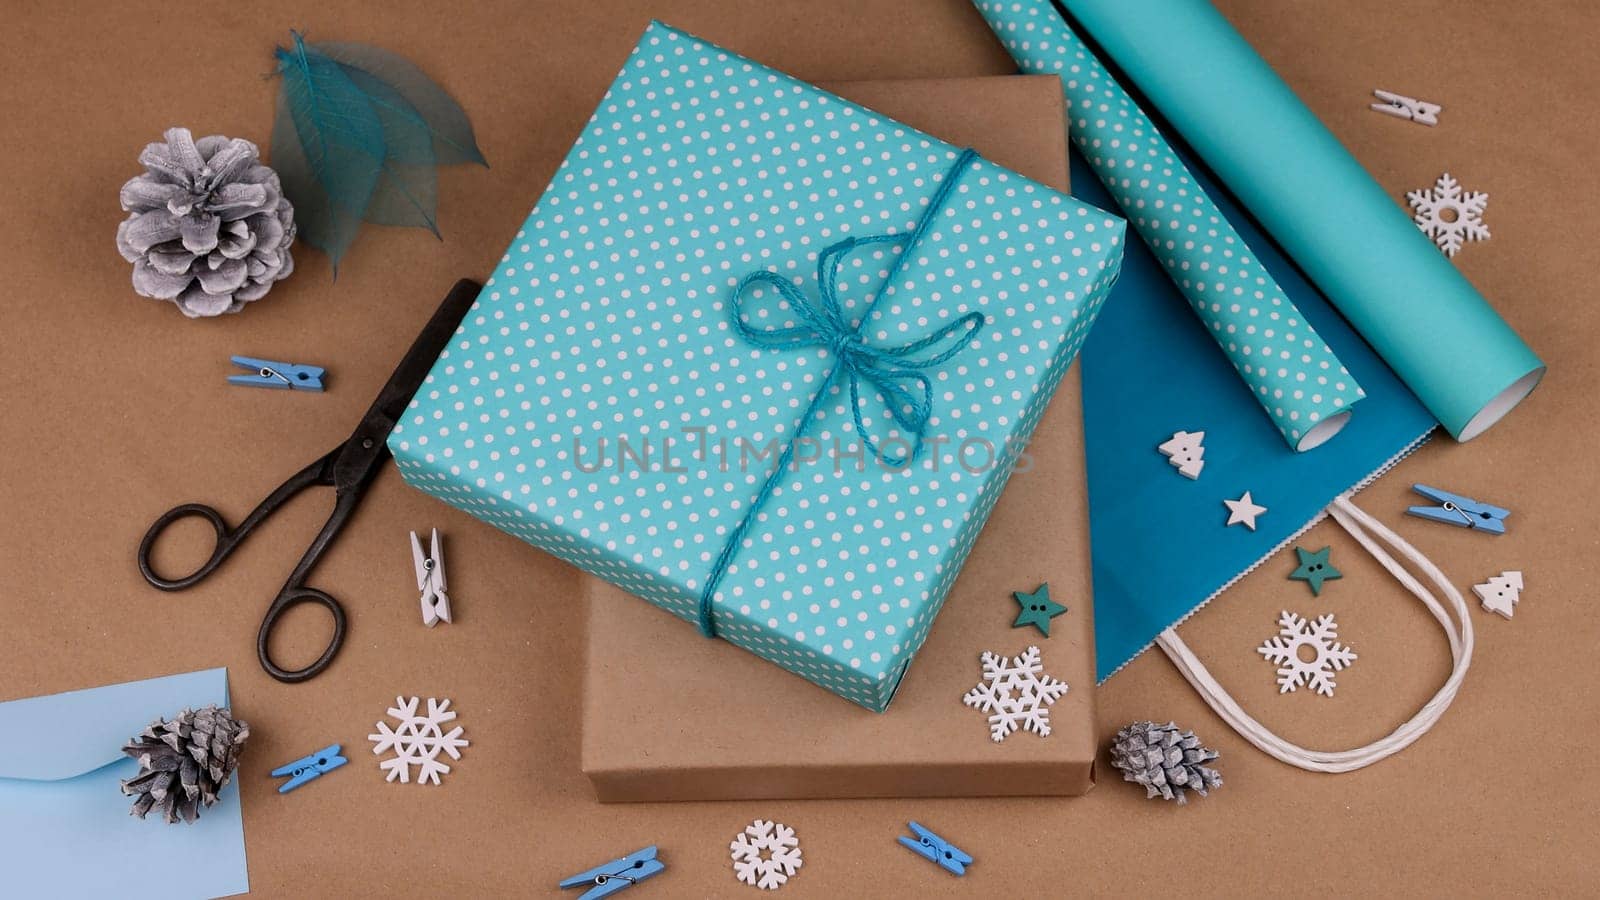 Packing Christmas gifts with blue paper by BreakingTheWalls